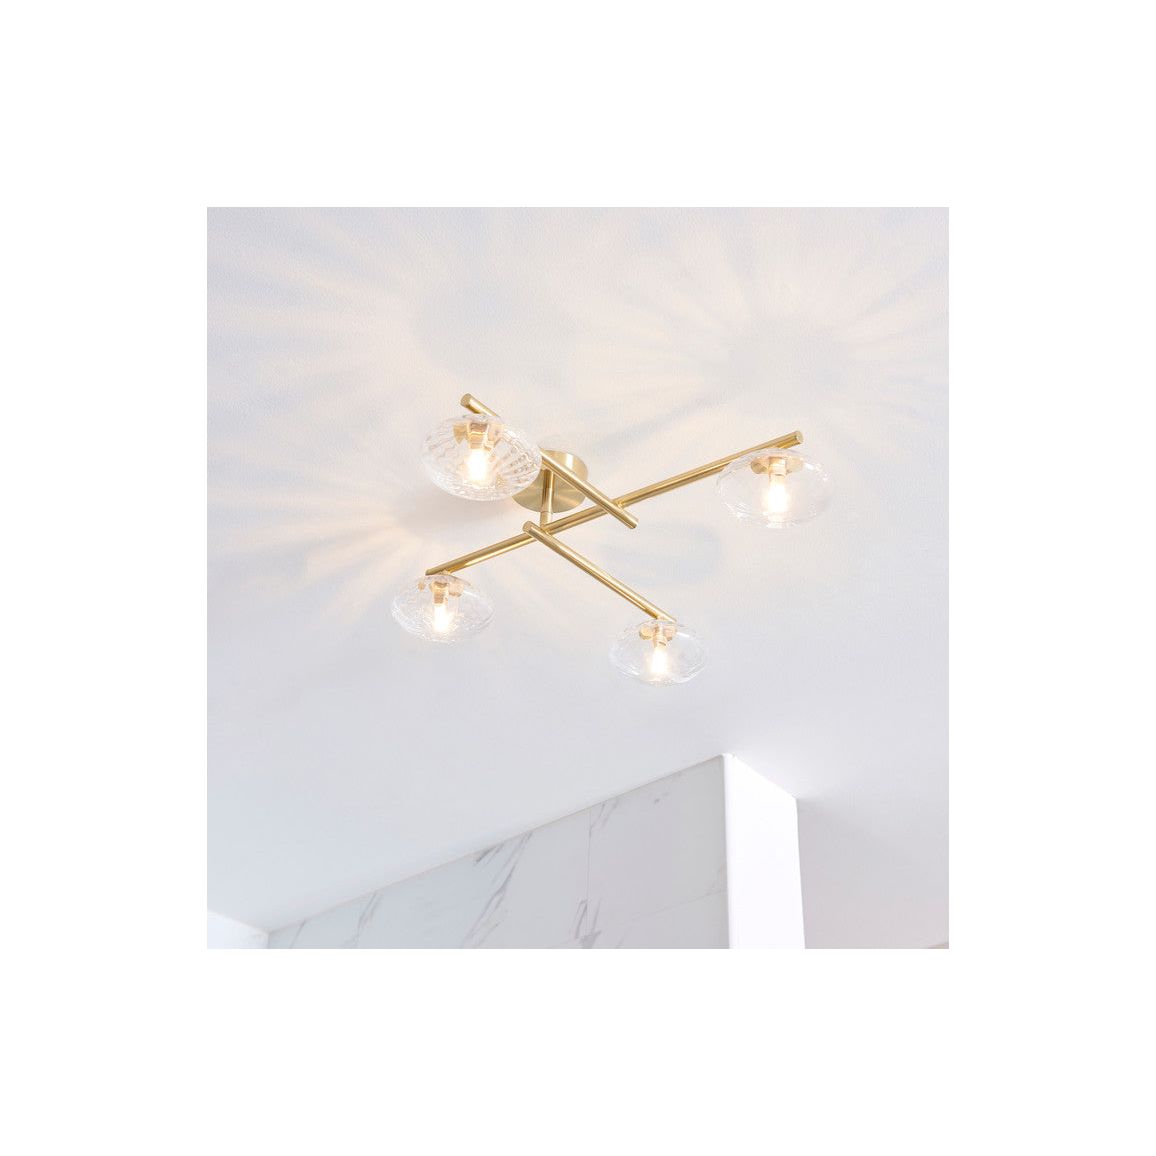 Albion Ceiling Light - Brushed Brass